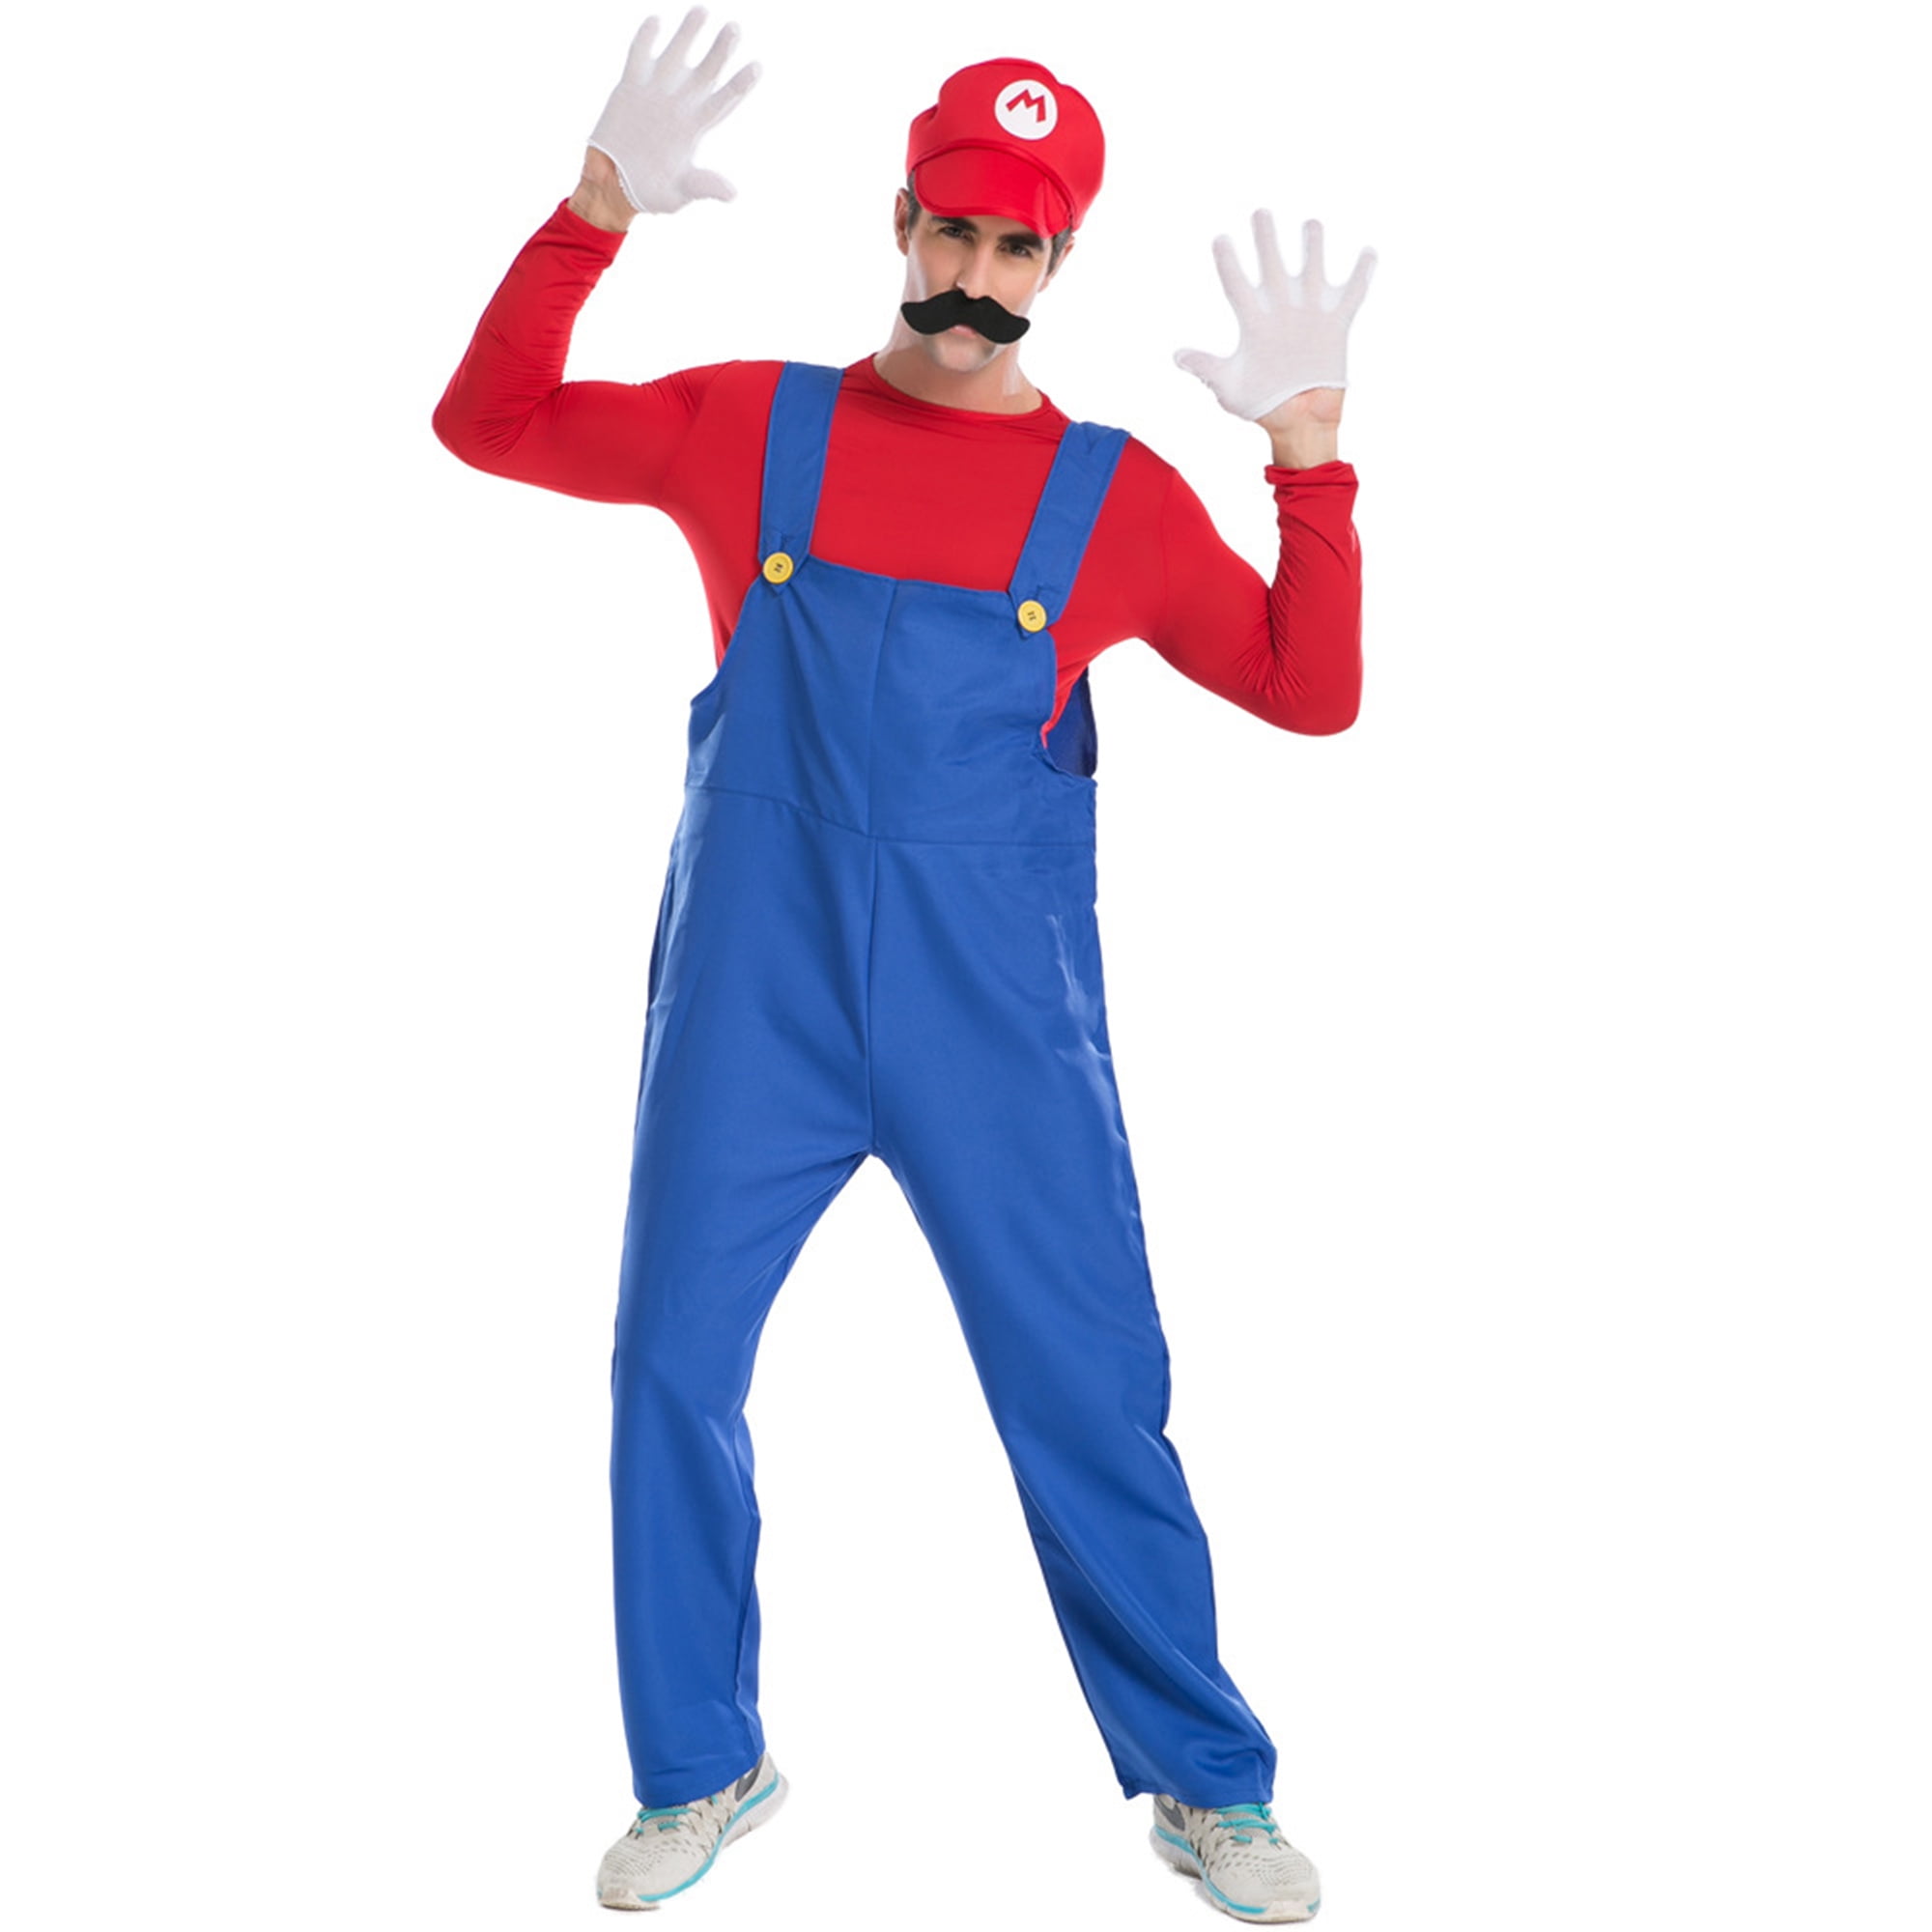 Super Mario Bros Unisex Adult & Kids Cosplay Fancy Dress Outfit Costume 